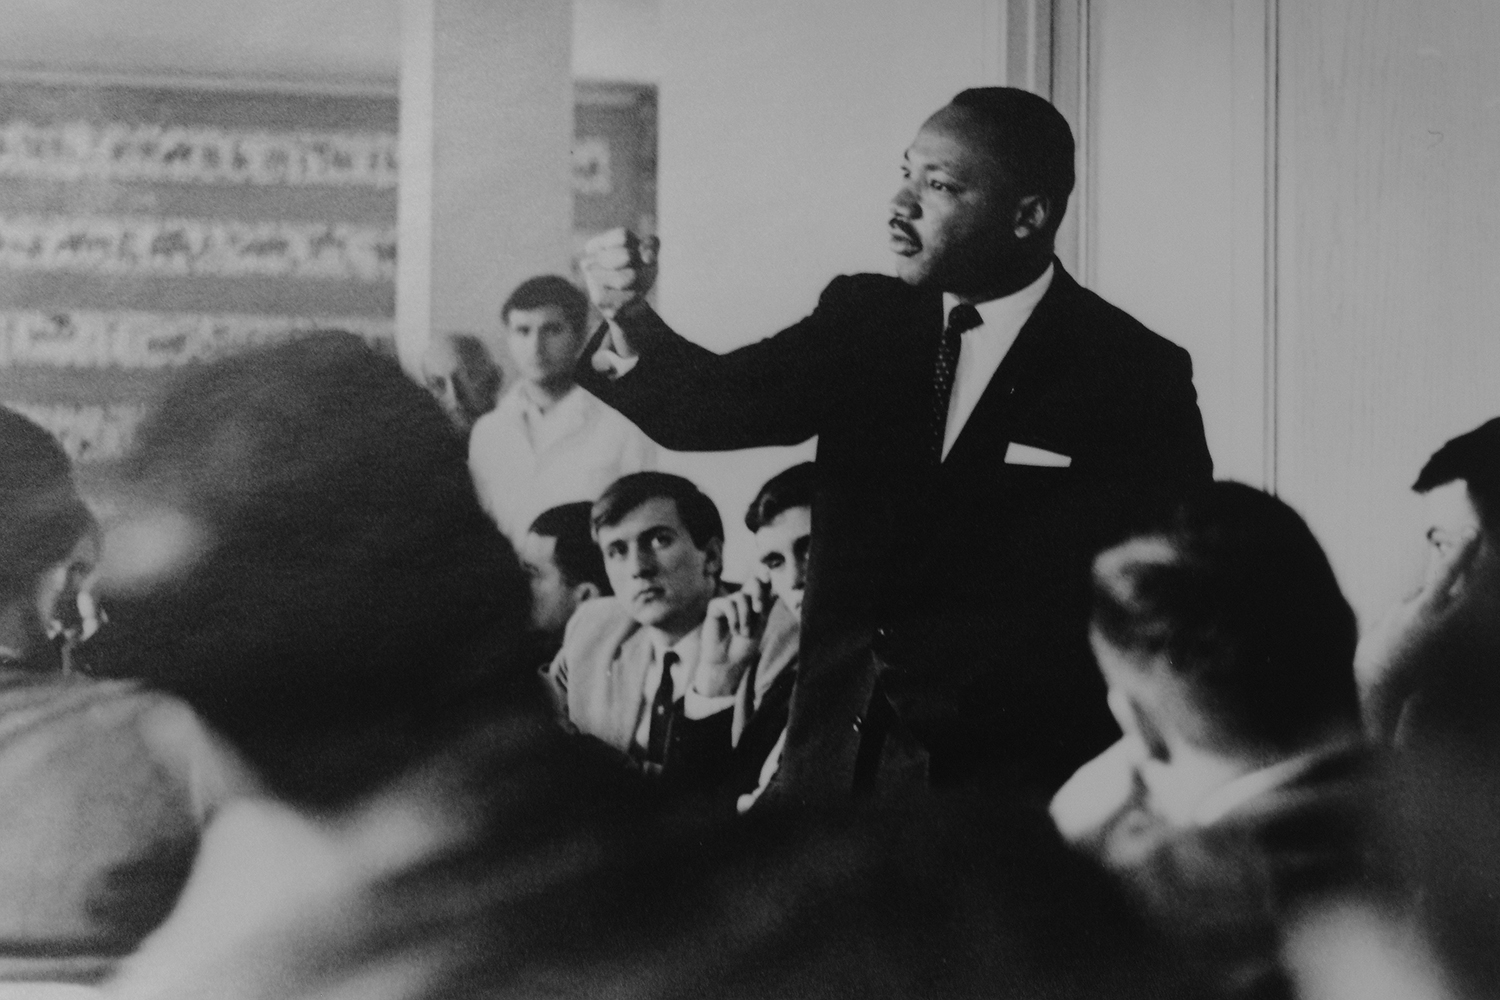 Dr. Martin Luther King, Jr. spoke at a College of Social Studies luncheon in 1964 and addressed a student rally later that day. 